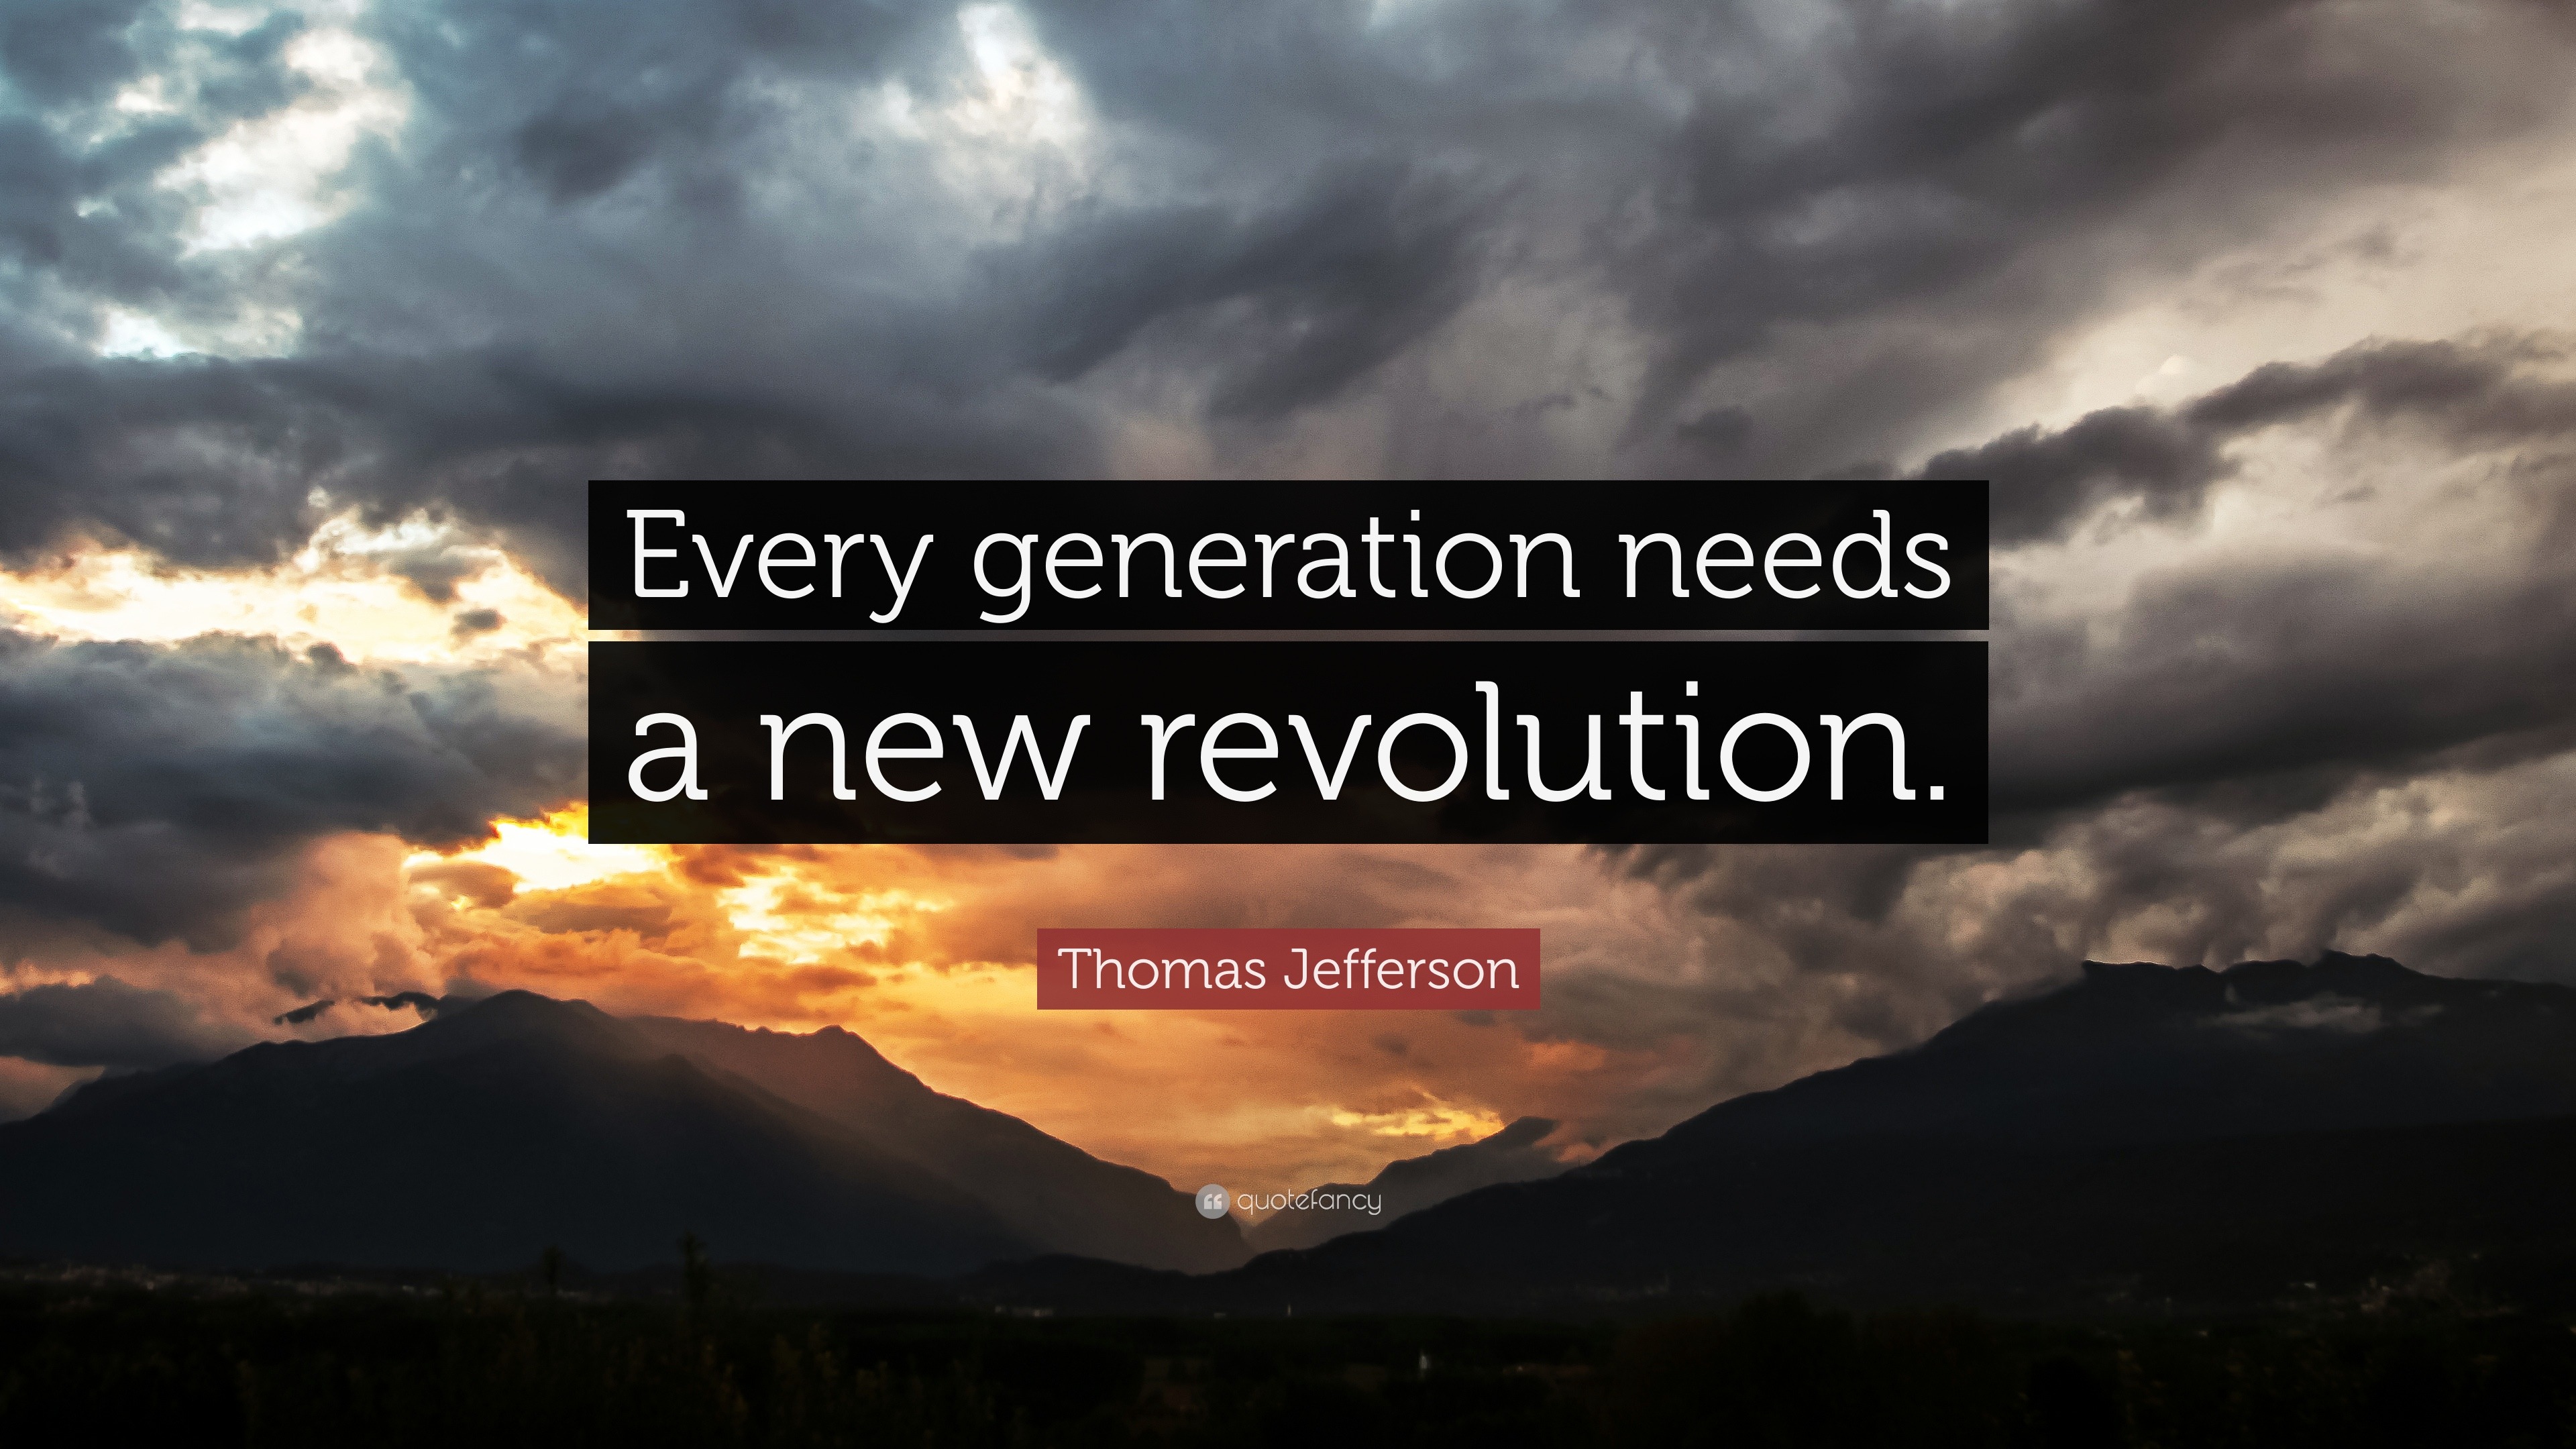 Thomas Jefferson Quotes (100 wallpapers) - Quotefancy